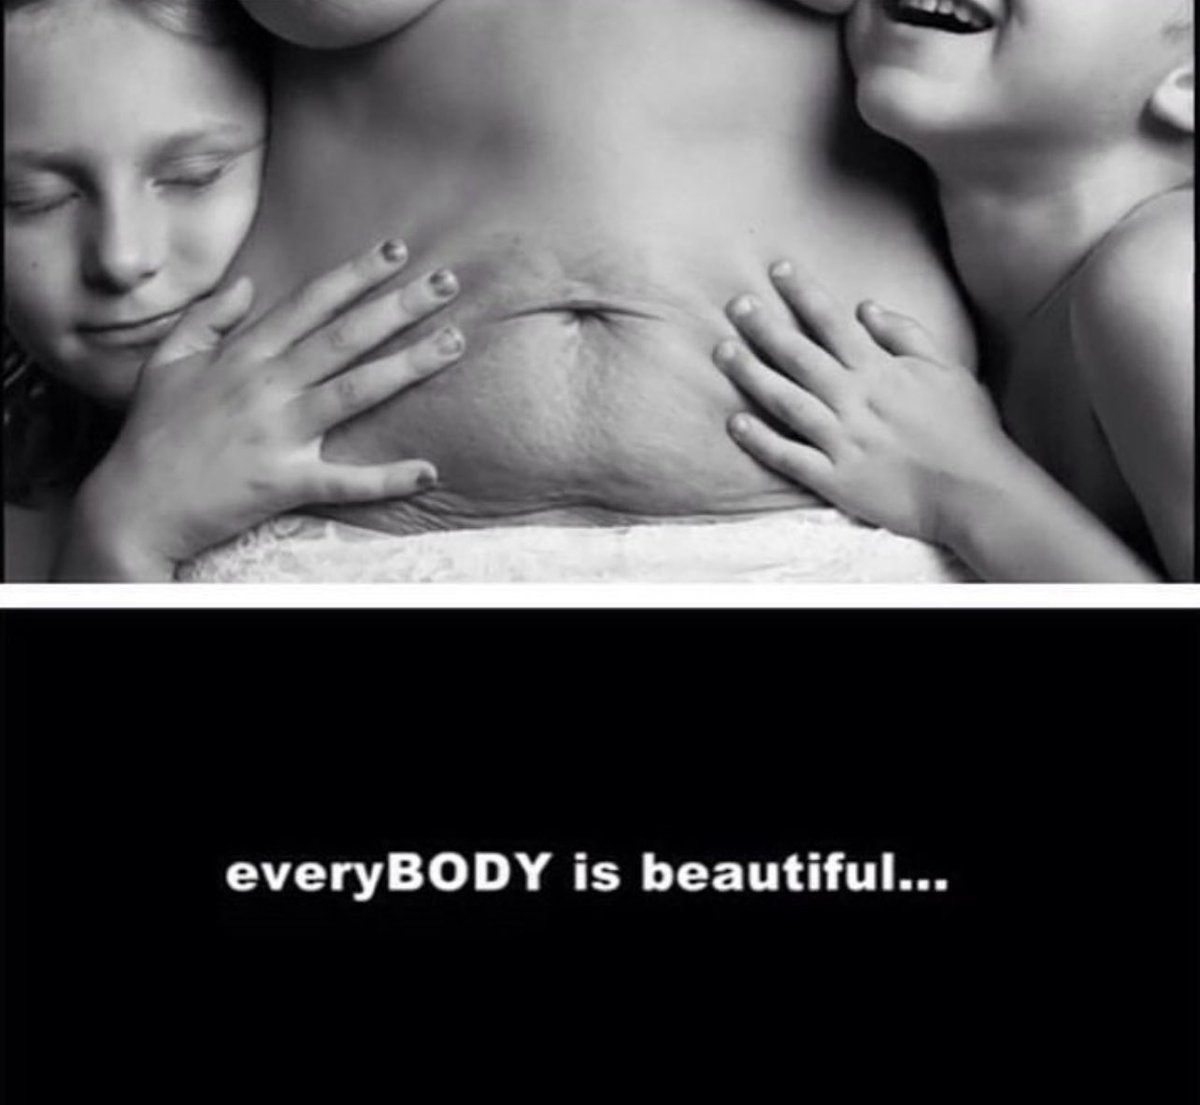 Every body is literally different and unique and inherently perfect in its shape and beauty. Every body is indeed beautiful.

#bodybeautiful #genz #healthyliving #healthyyou #bodyshaming #body #beauty